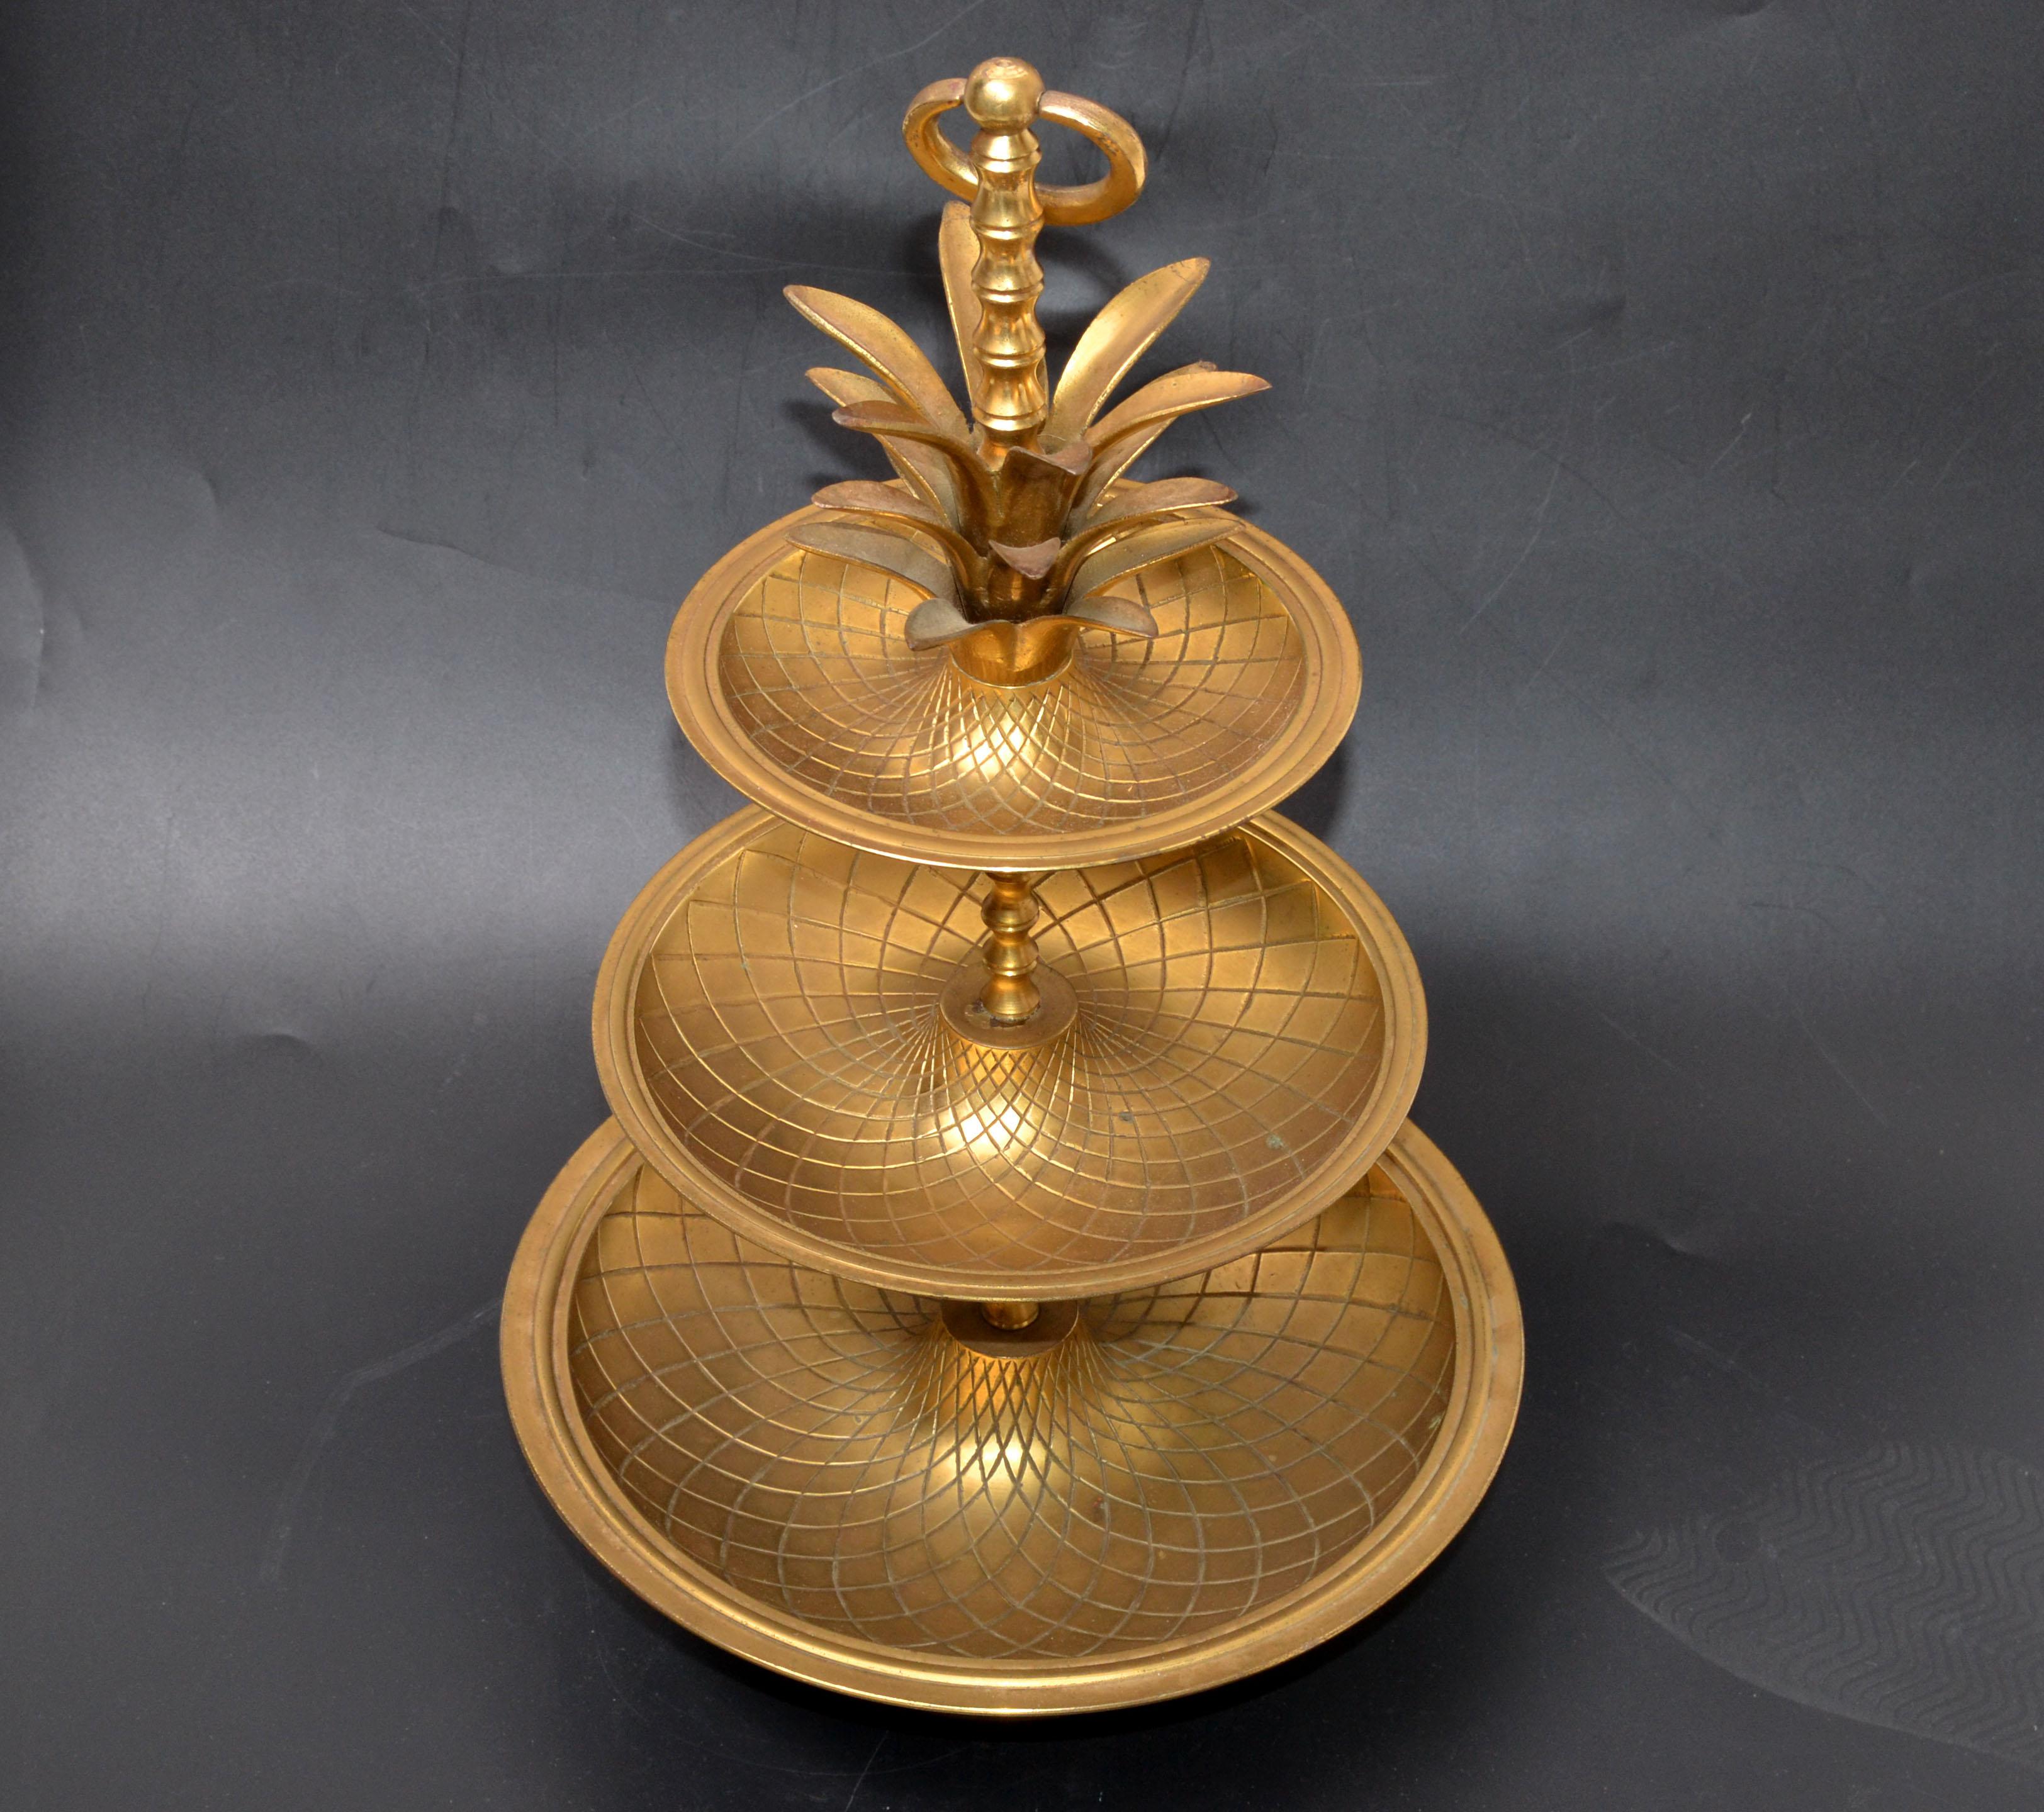 Hollywood Regency brass pineapple 3-tier nesting serving tray stand.
Trays measure from 10.25 inches to 7.75 to 5.75 inches in Diameter.
       